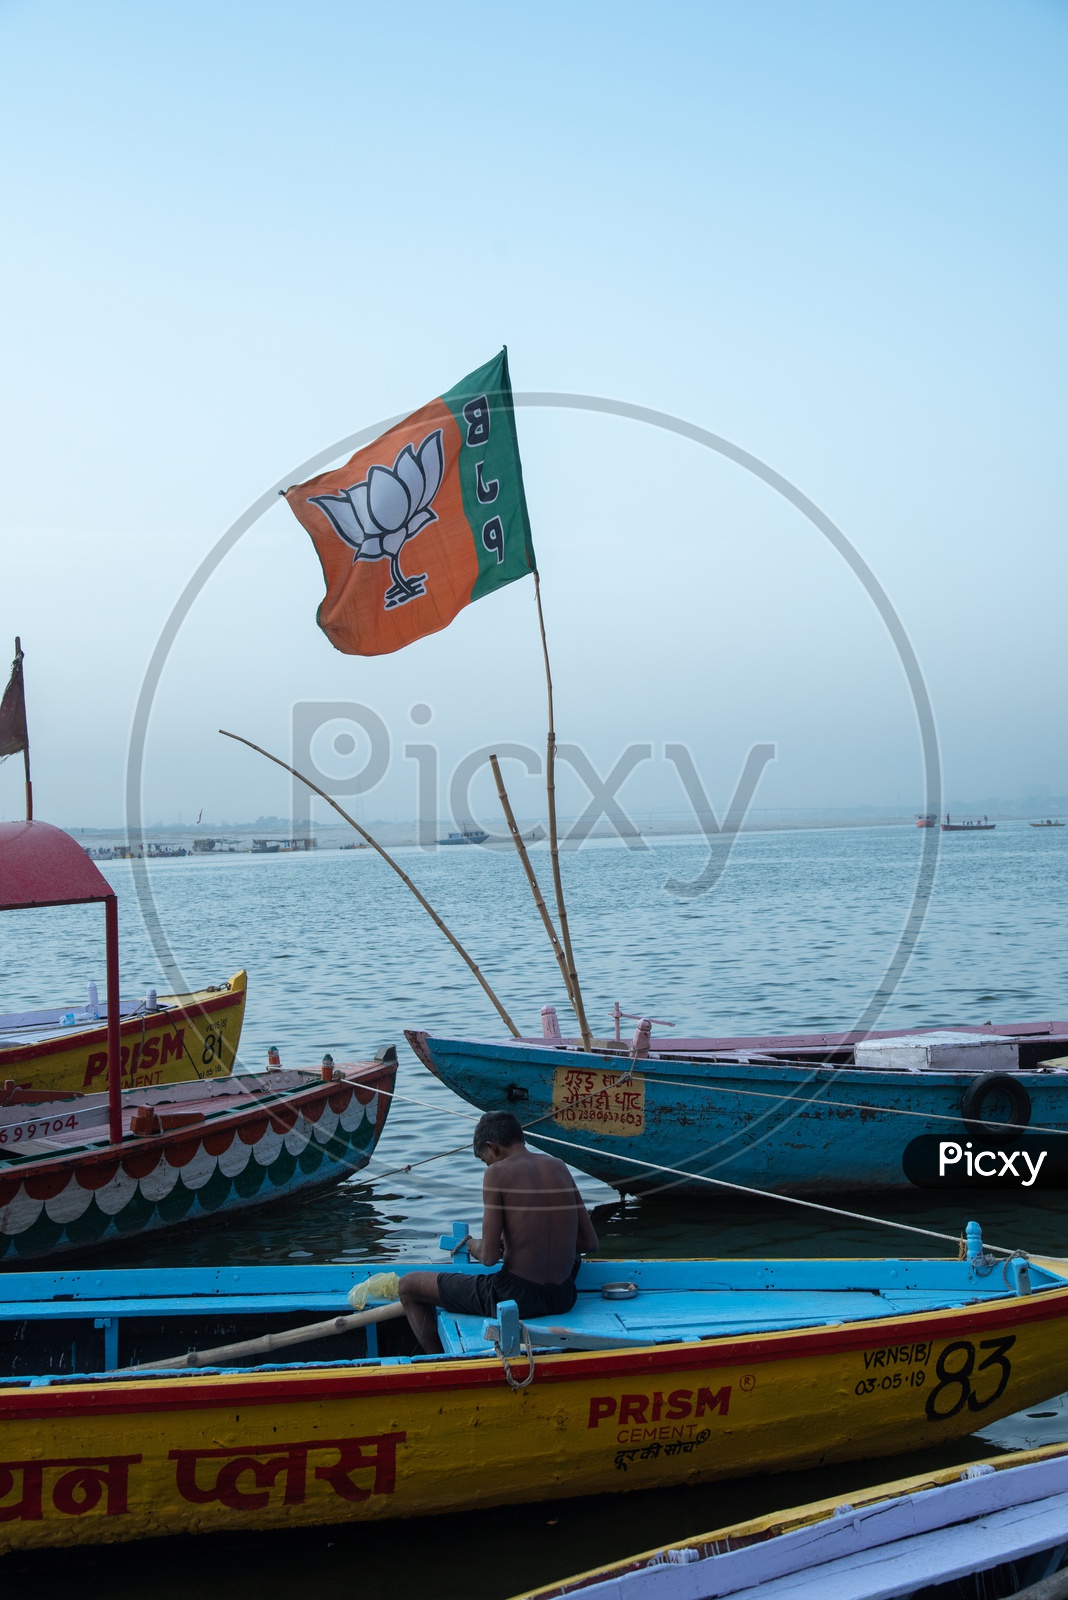 BJP Party Flags Tagged  to Commuting Boats   at Ghats In Varanasi